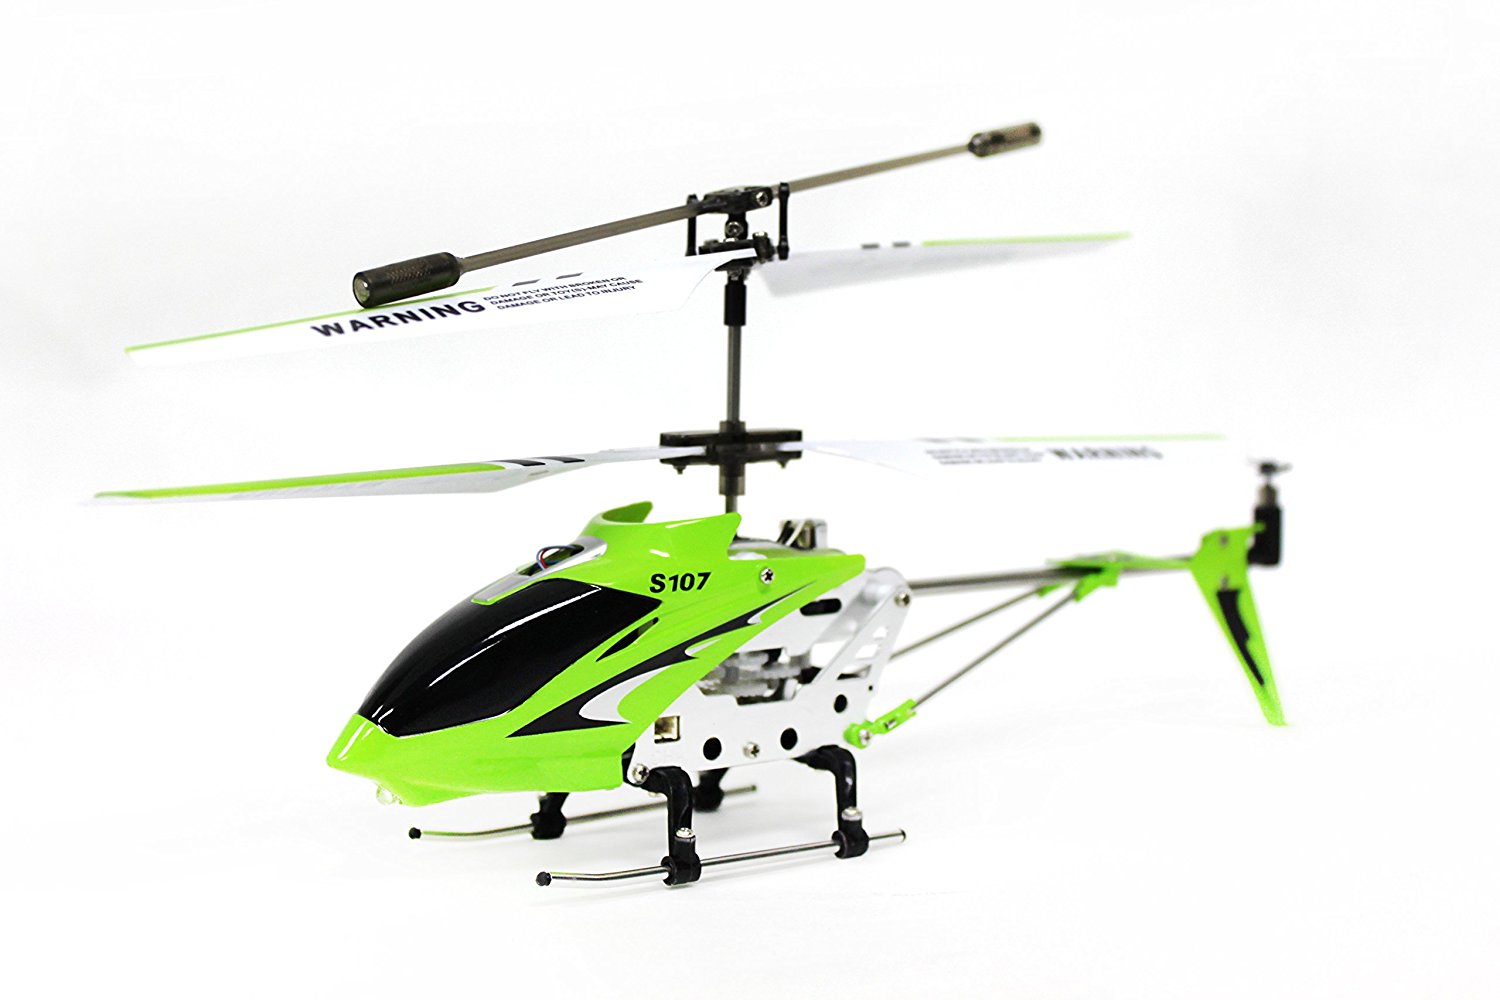 s107g metal series helicopter price